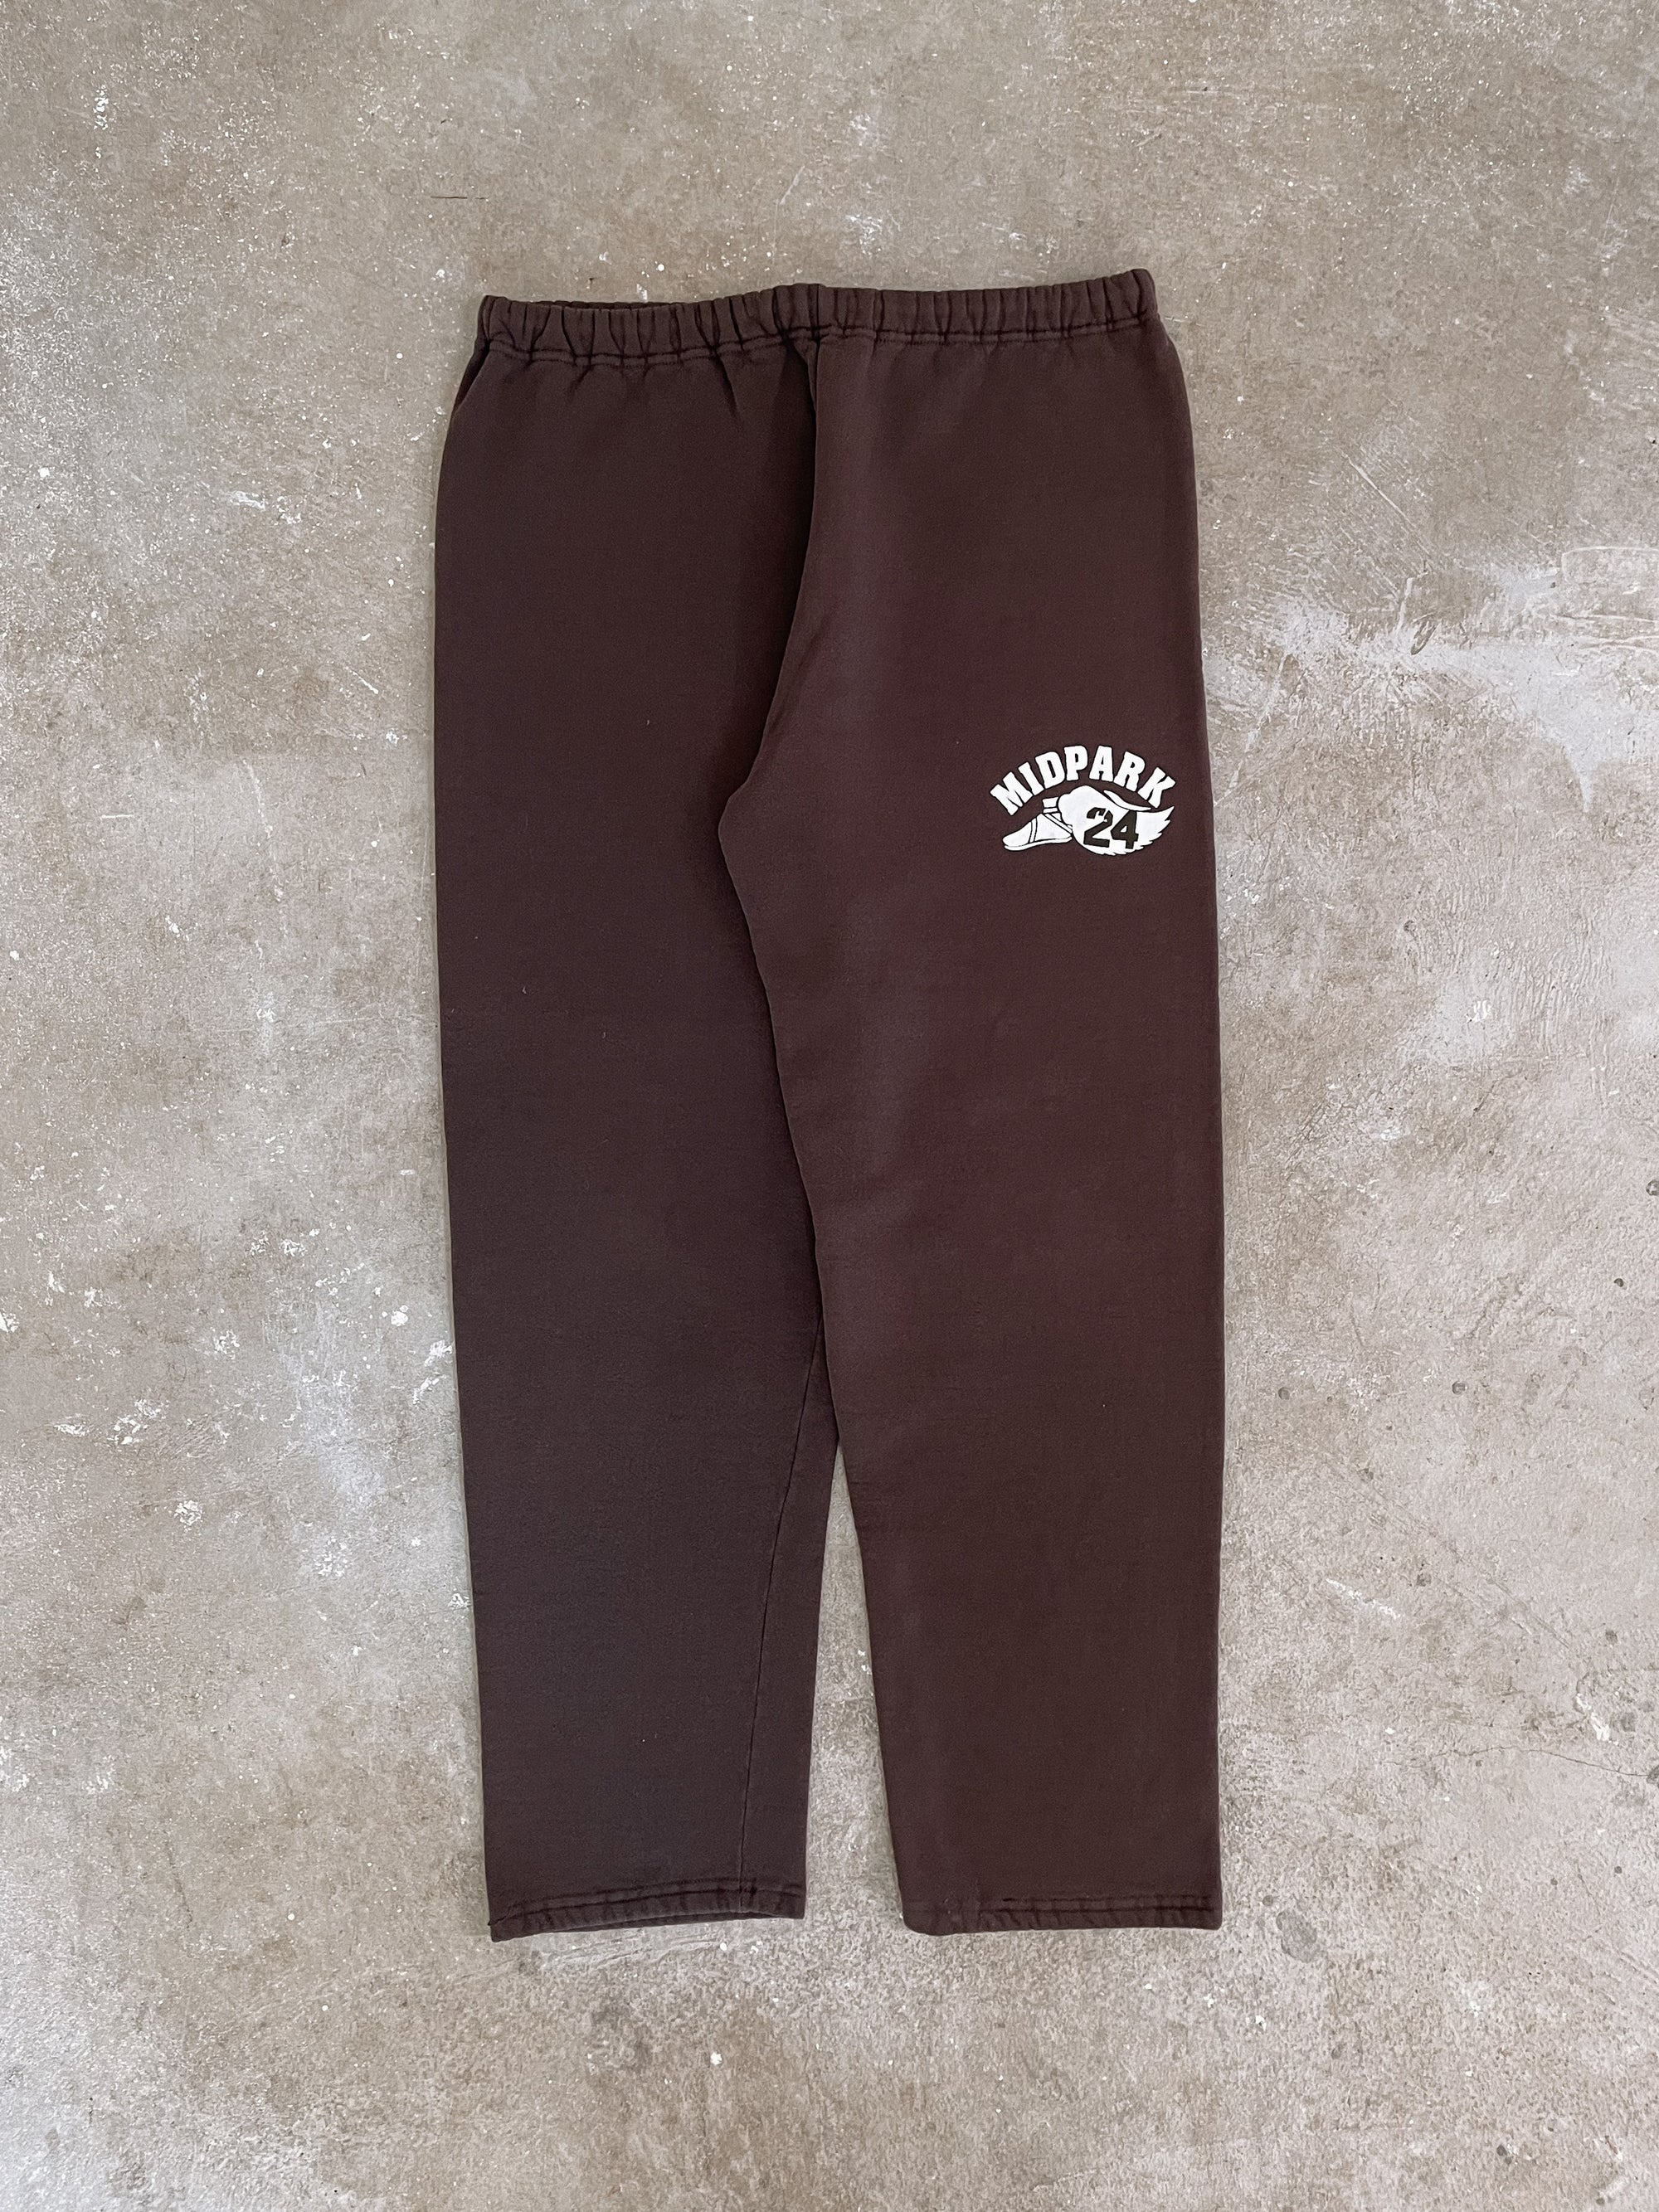 1990s Russell “Midpark” Brown Sweatpants (L)